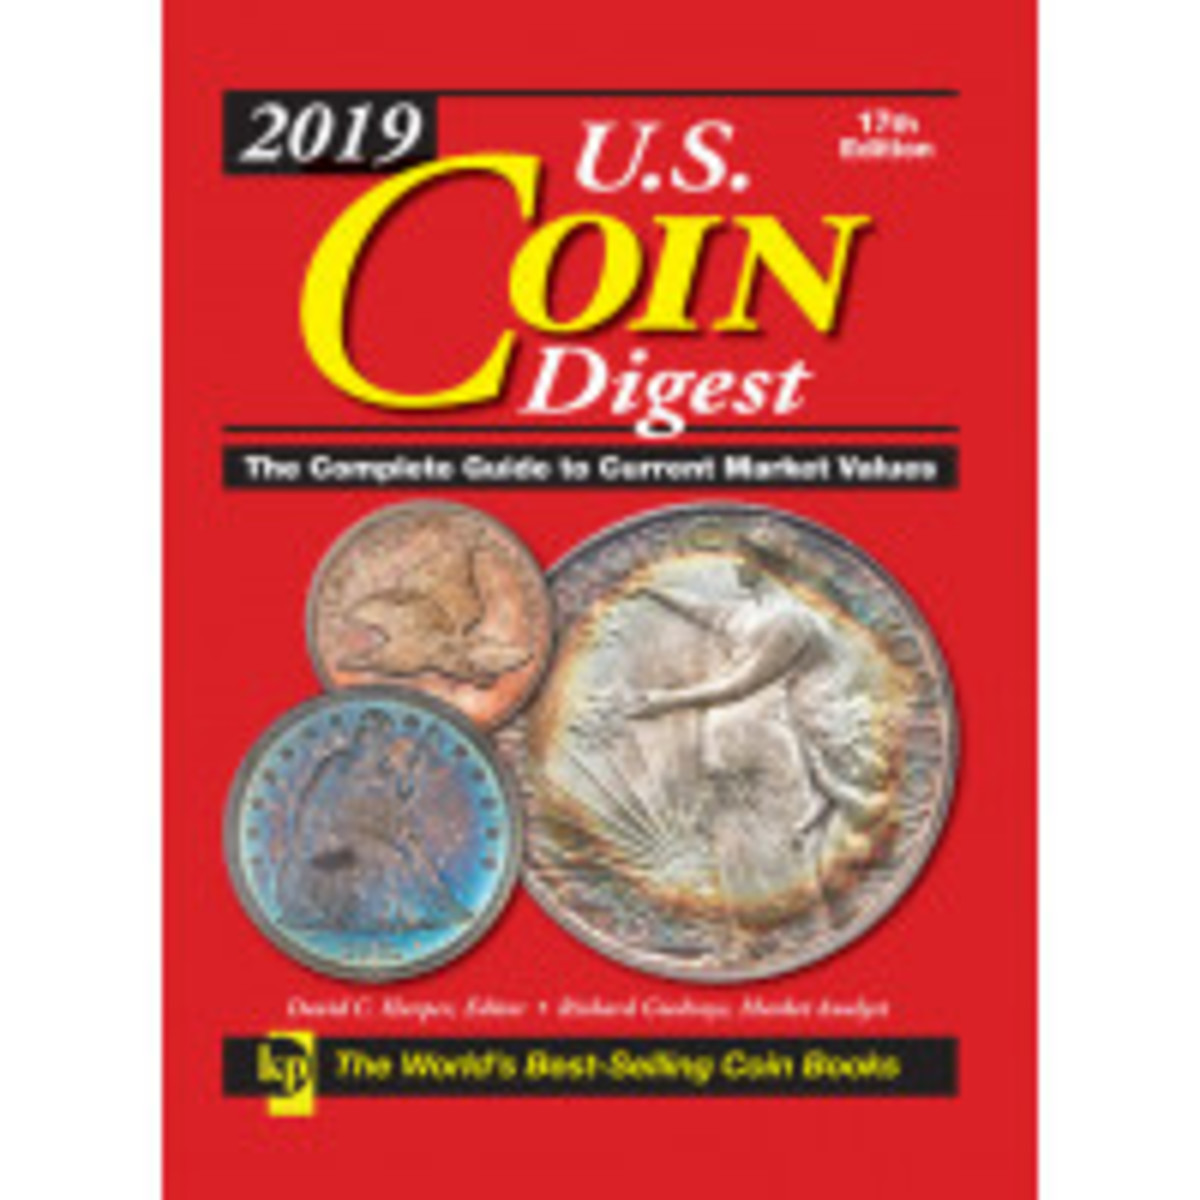 Spring Cleaning Your Collection, Part 3 - Numismatic News